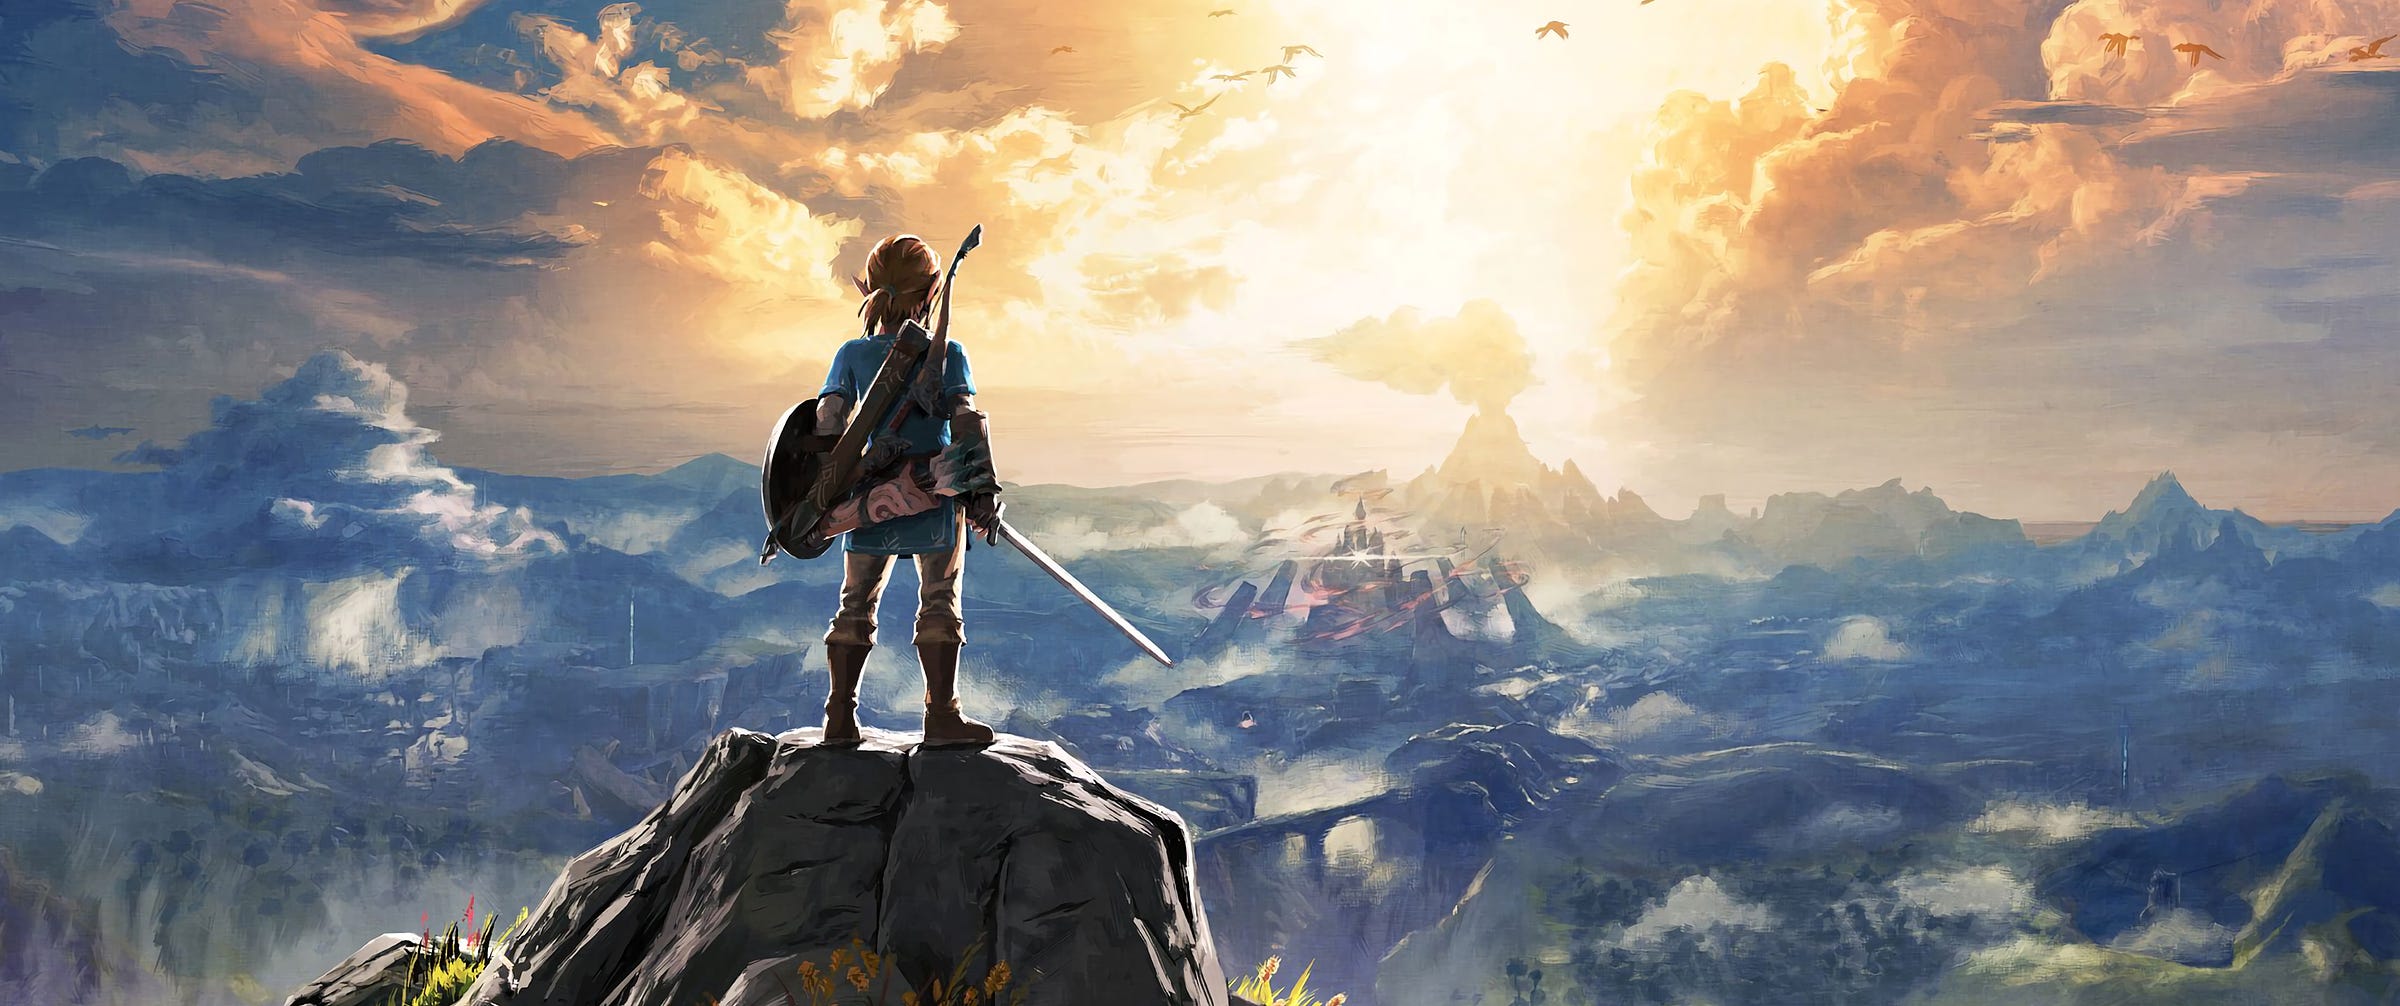 A young man in a blue shirt holding a sword and shield, with a bow and sheath draped across his back and a quiver on his belt, looks out over a vast mountainous landscape at sunset. A castle surrounded by red fog sits far in the distance.